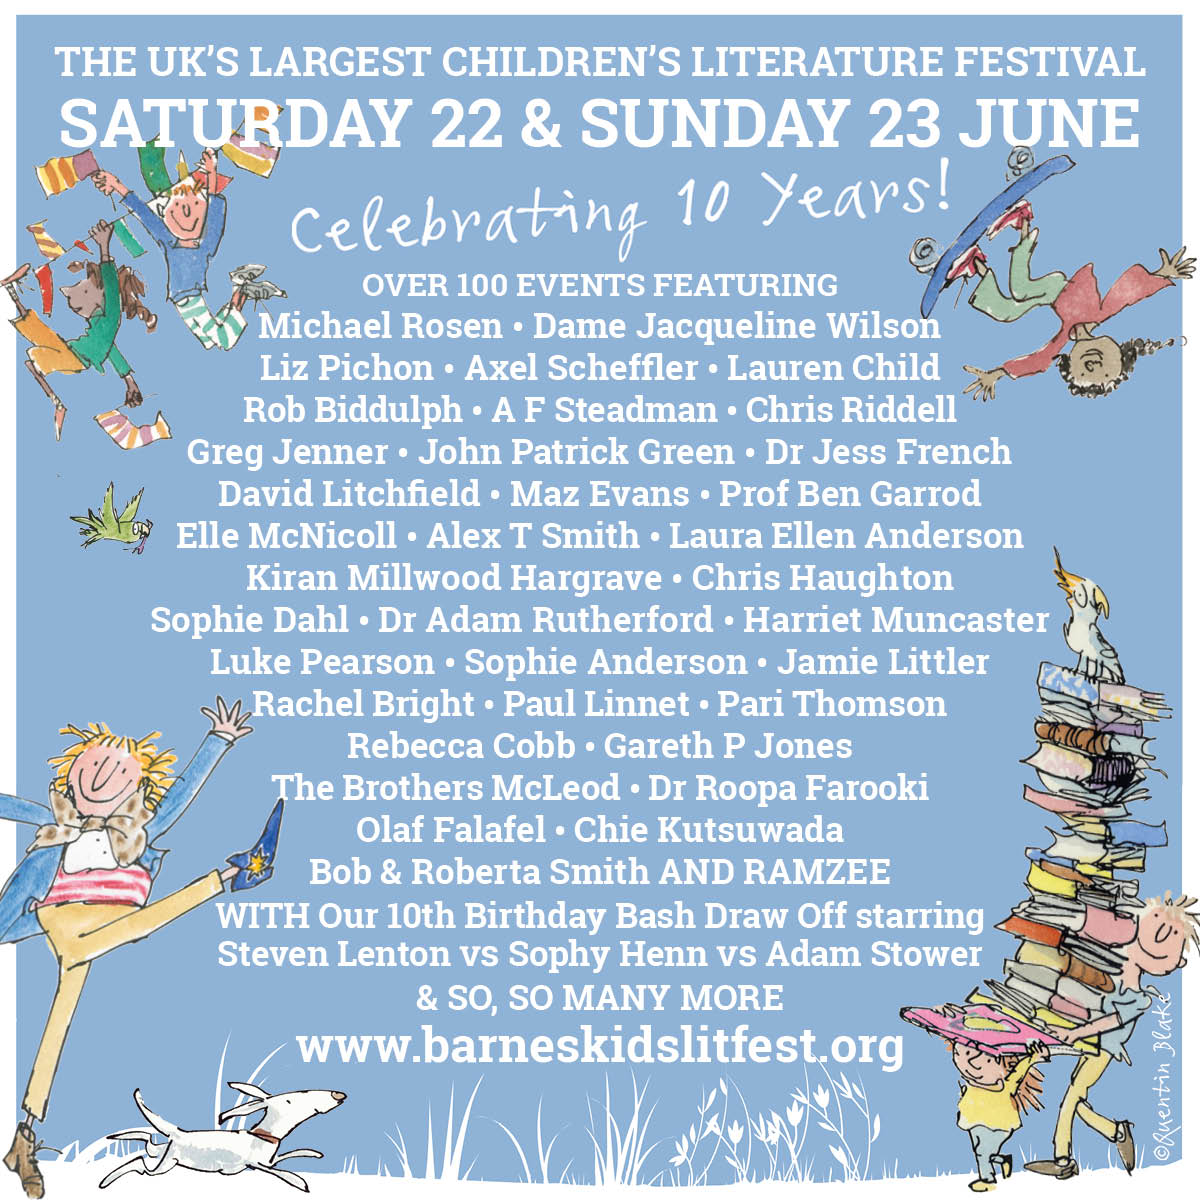 Hooray! We're one more weekend closer to the UK's biggest kids' books festival on Saturday 22 & Sunday 23 June. Grab your tickets now and join us for a kids' books adventure like no other barneskidslitfest.org/whats-on/